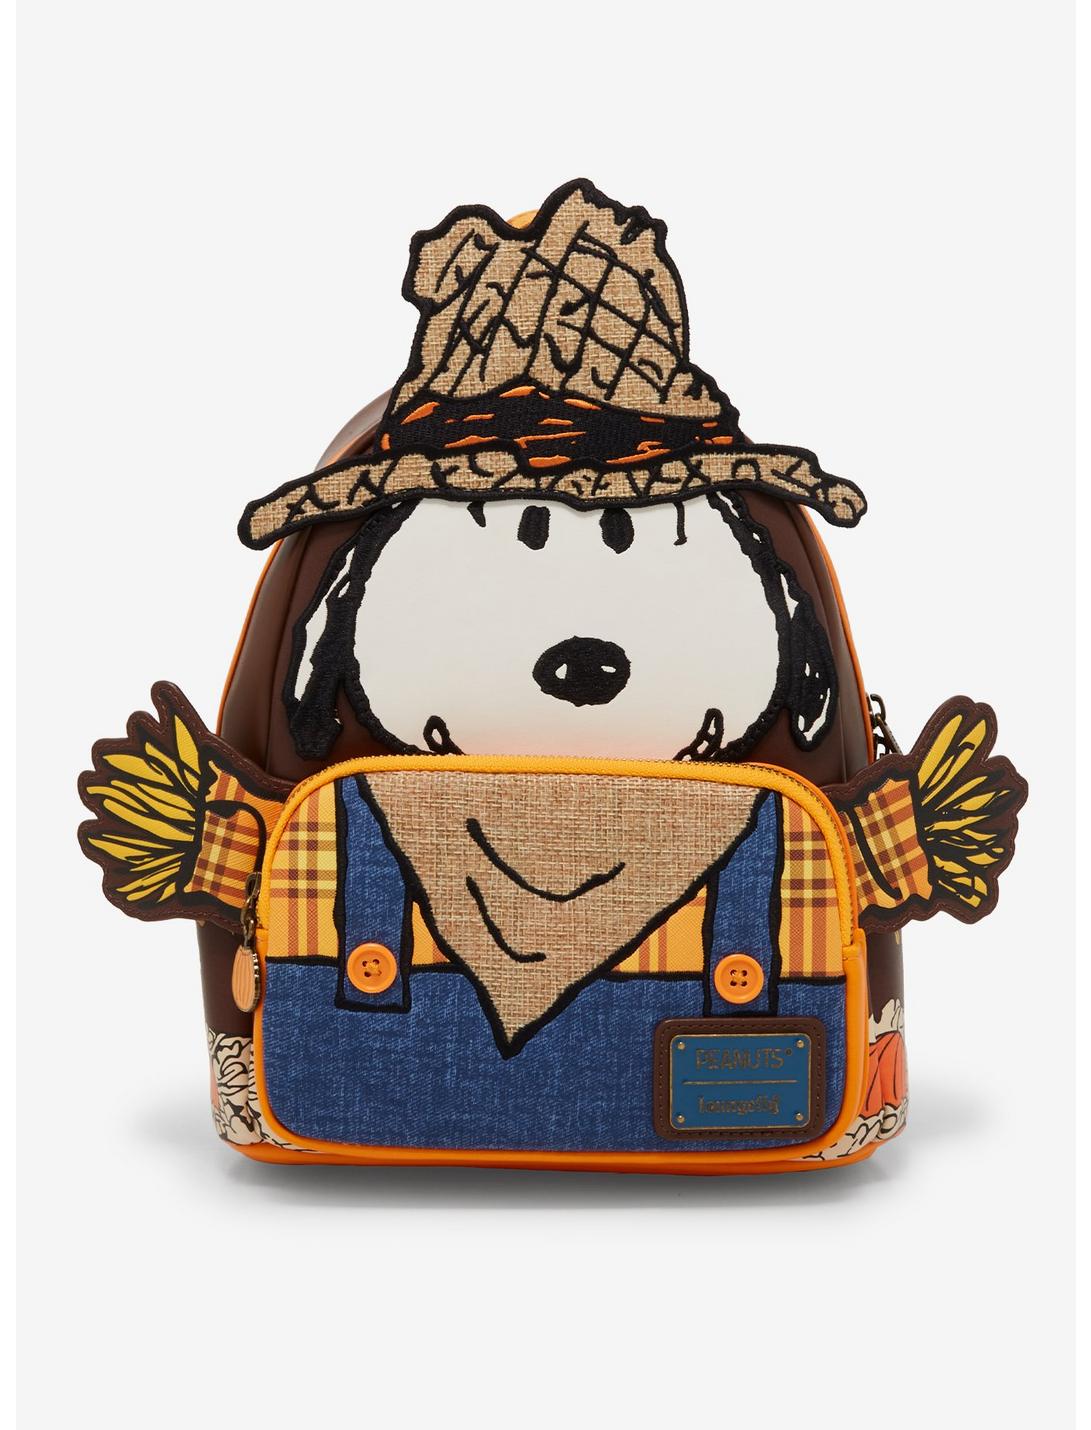 Loungefly Peanuts Snoopy Scarecrow Costume Figural Mini Backpack, , hi-res